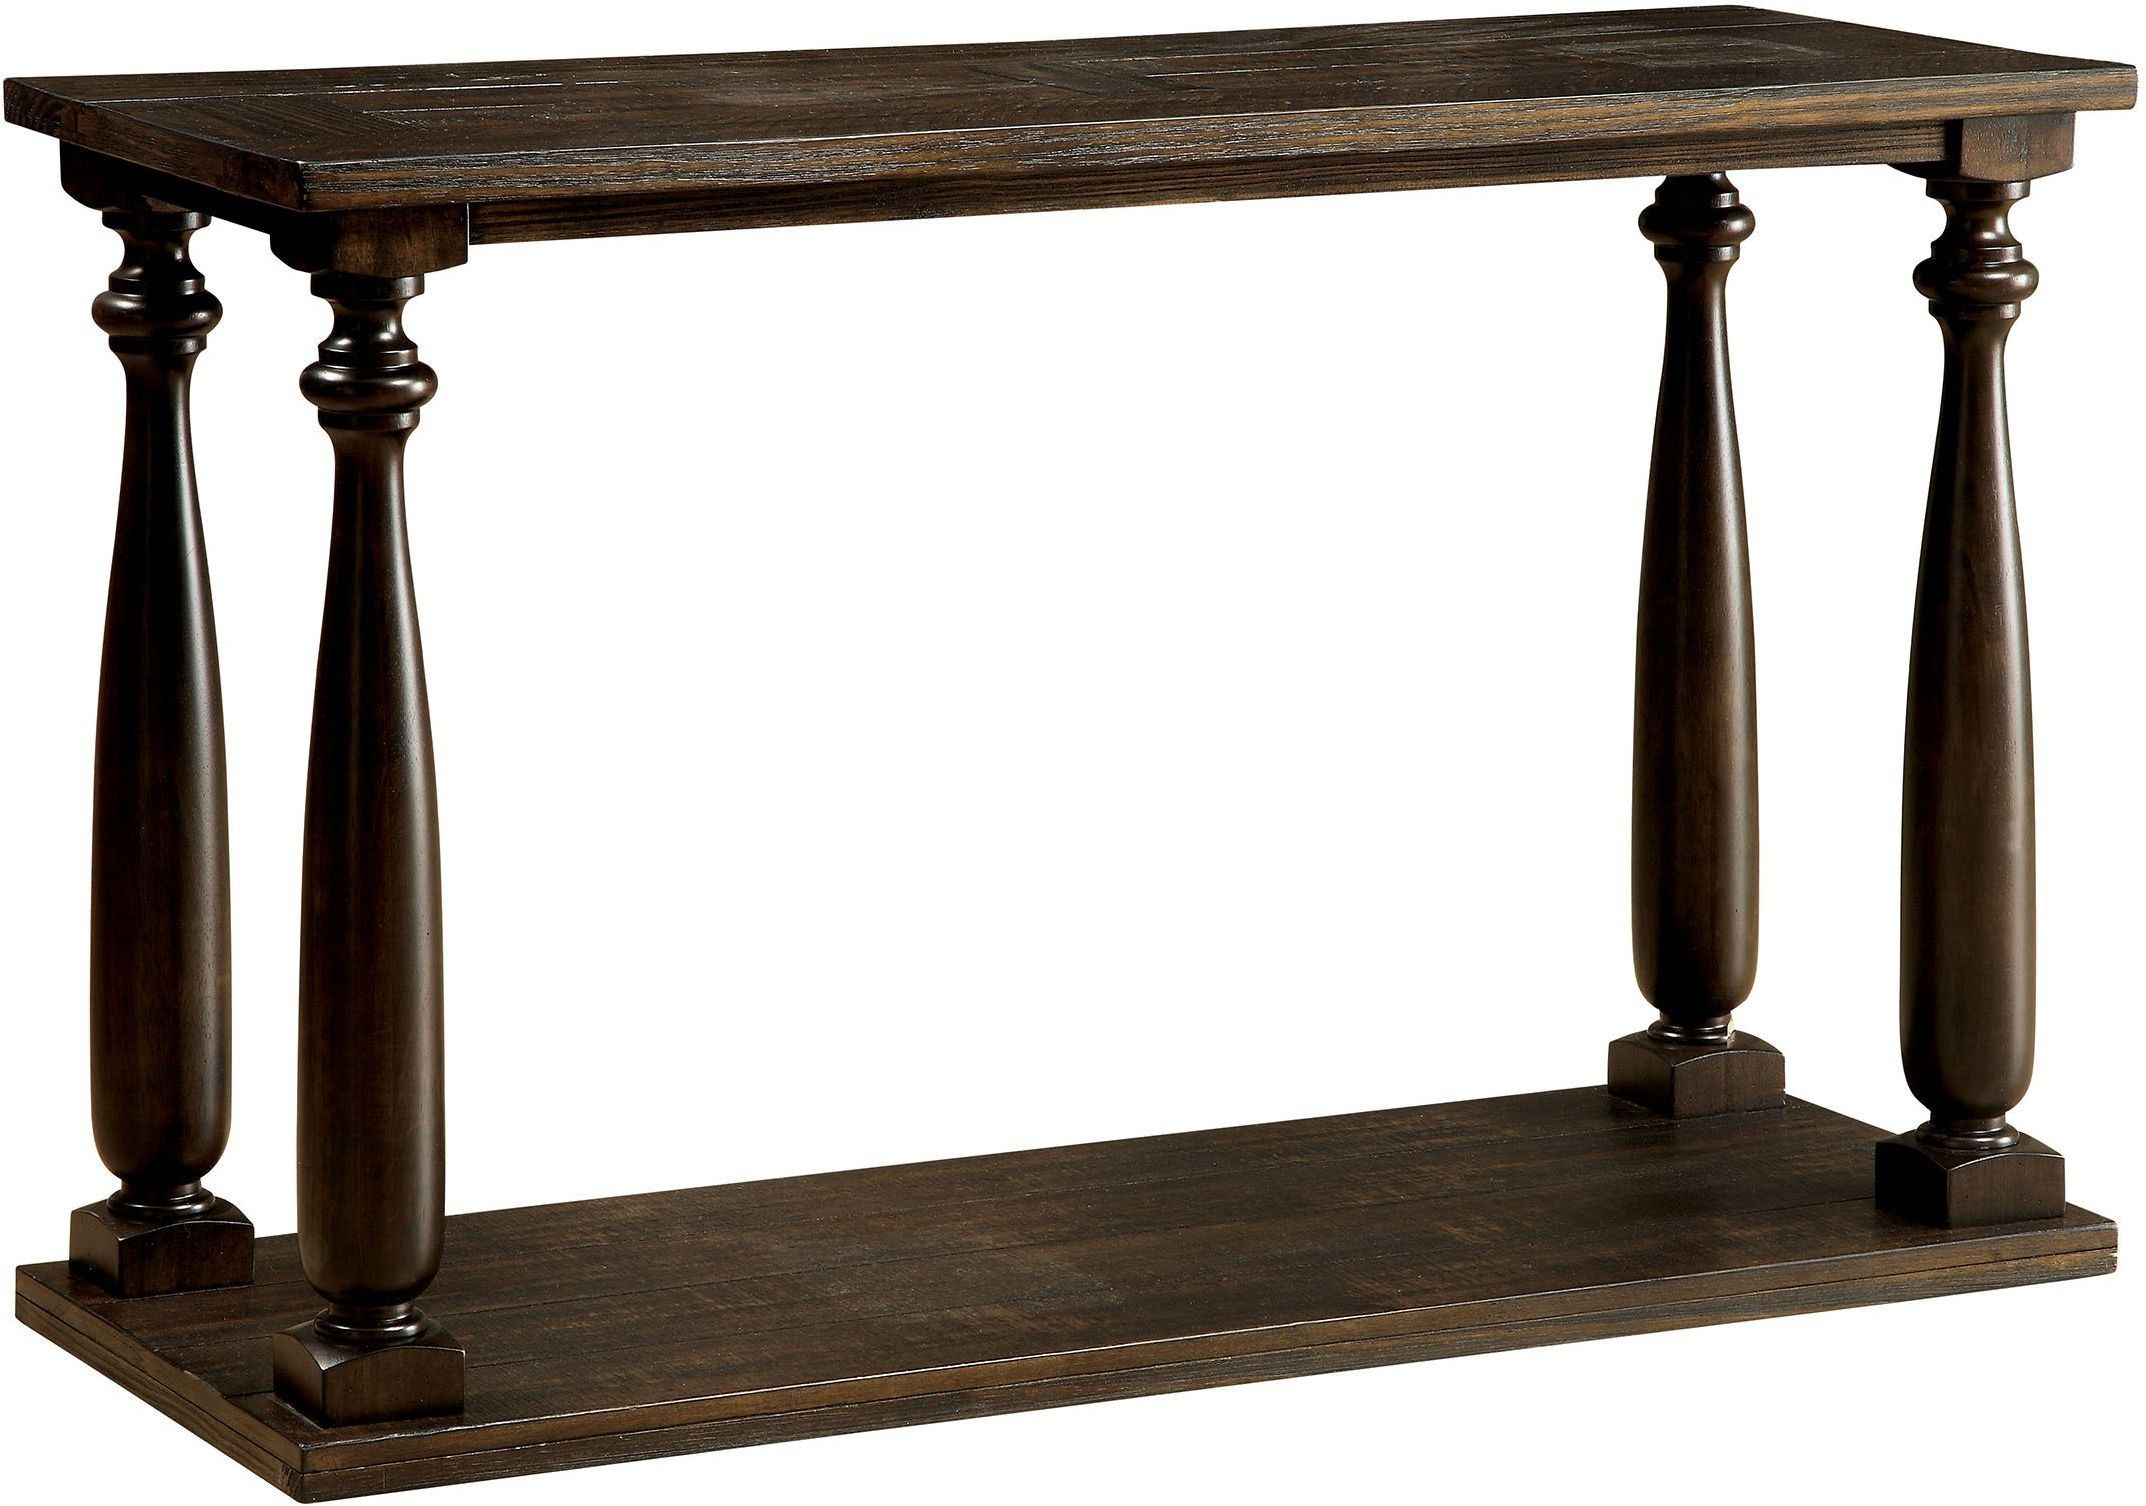 Luan Dark Walnut Sofa Table From Furniture Of America Inside Hand Finished Walnut Console Tables (View 3 of 20)